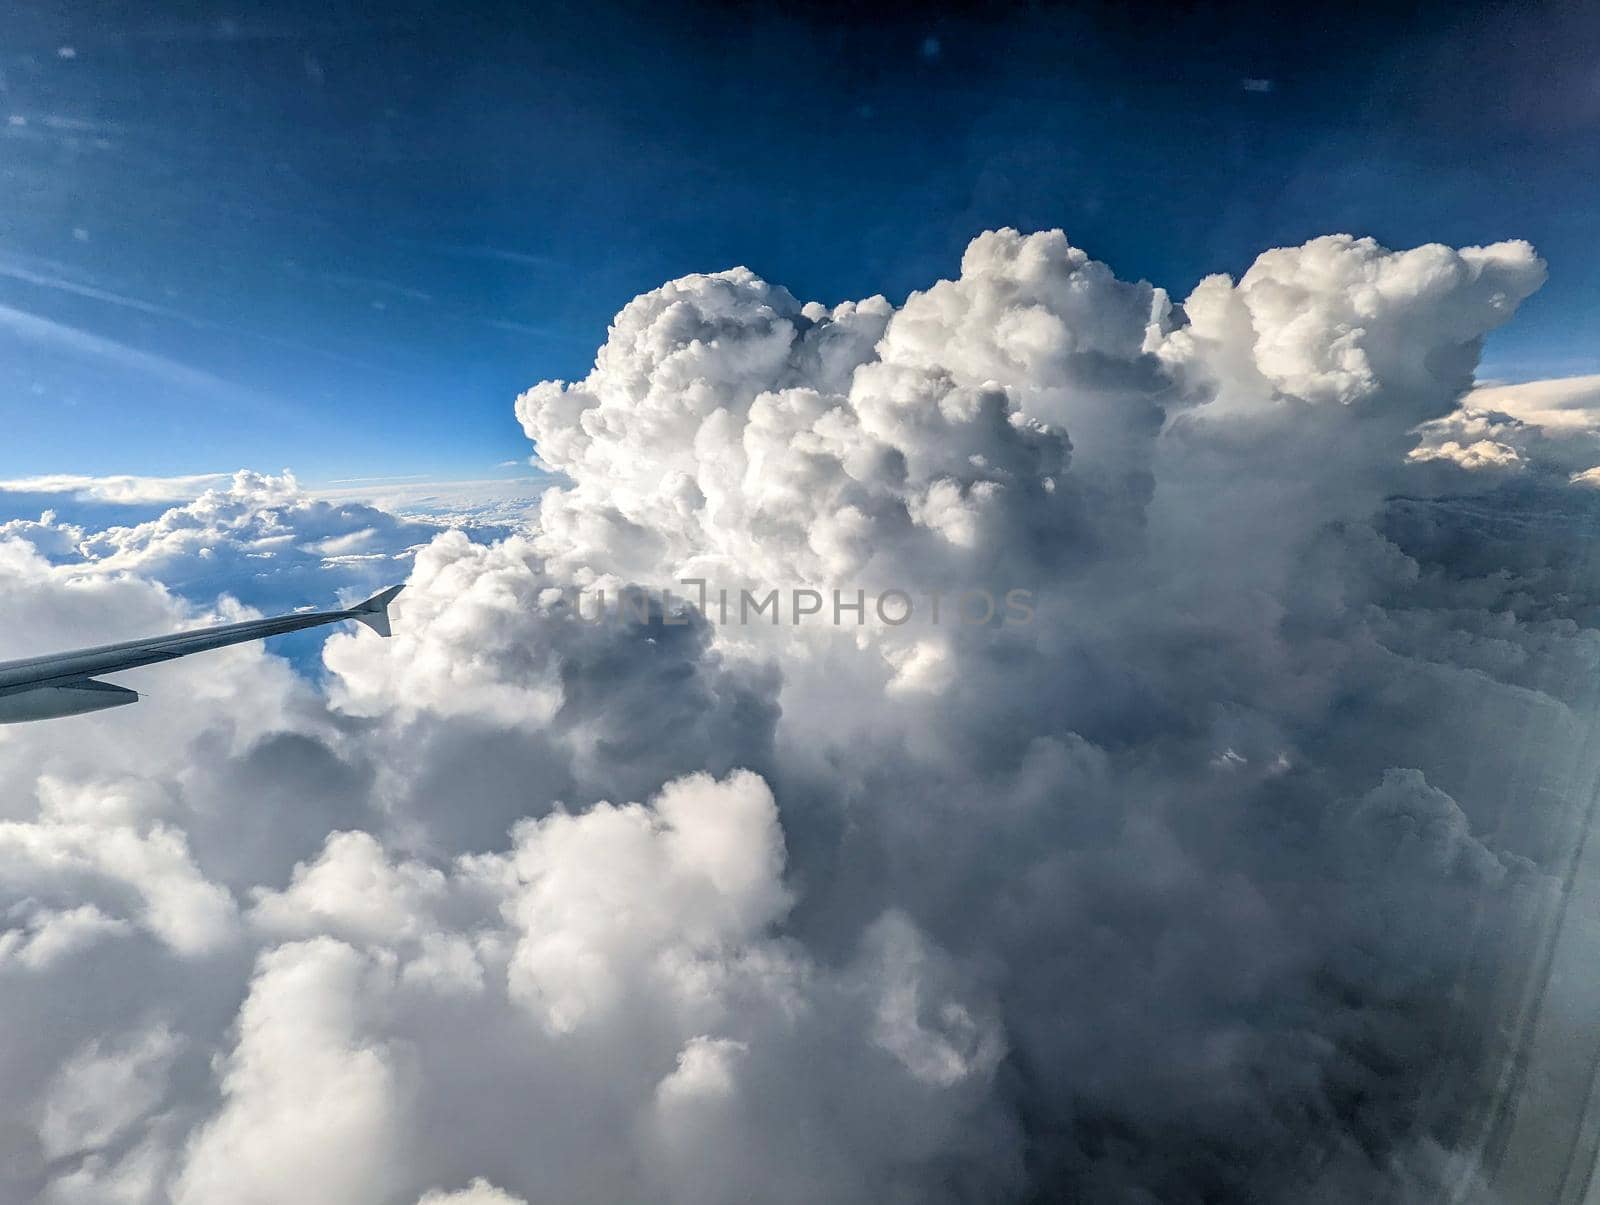 flying high in the sky with beautiful clouds